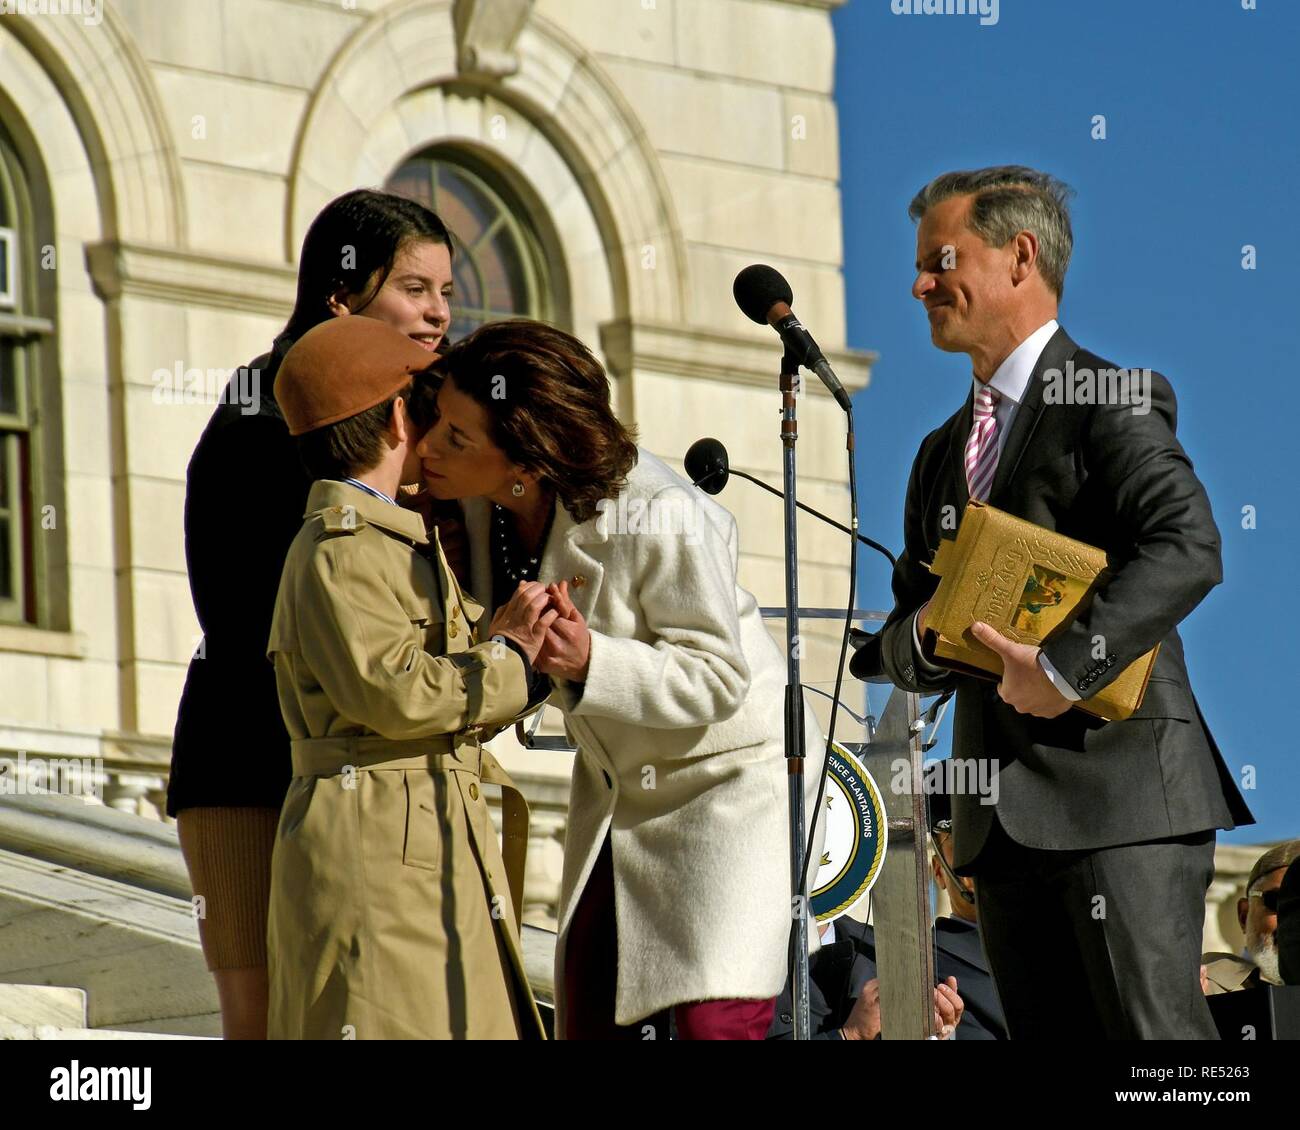 Rhode Island's 75th Governor, the Honorable Gina Raimondo, accompanied by her husband and children, is sworn in by Secretary Nellie Gorbea at an inauguration ceremony held on the State House lawn in Providence, Rhode Island, January 1, 2019. U.S. Air National Guard Stock Photo